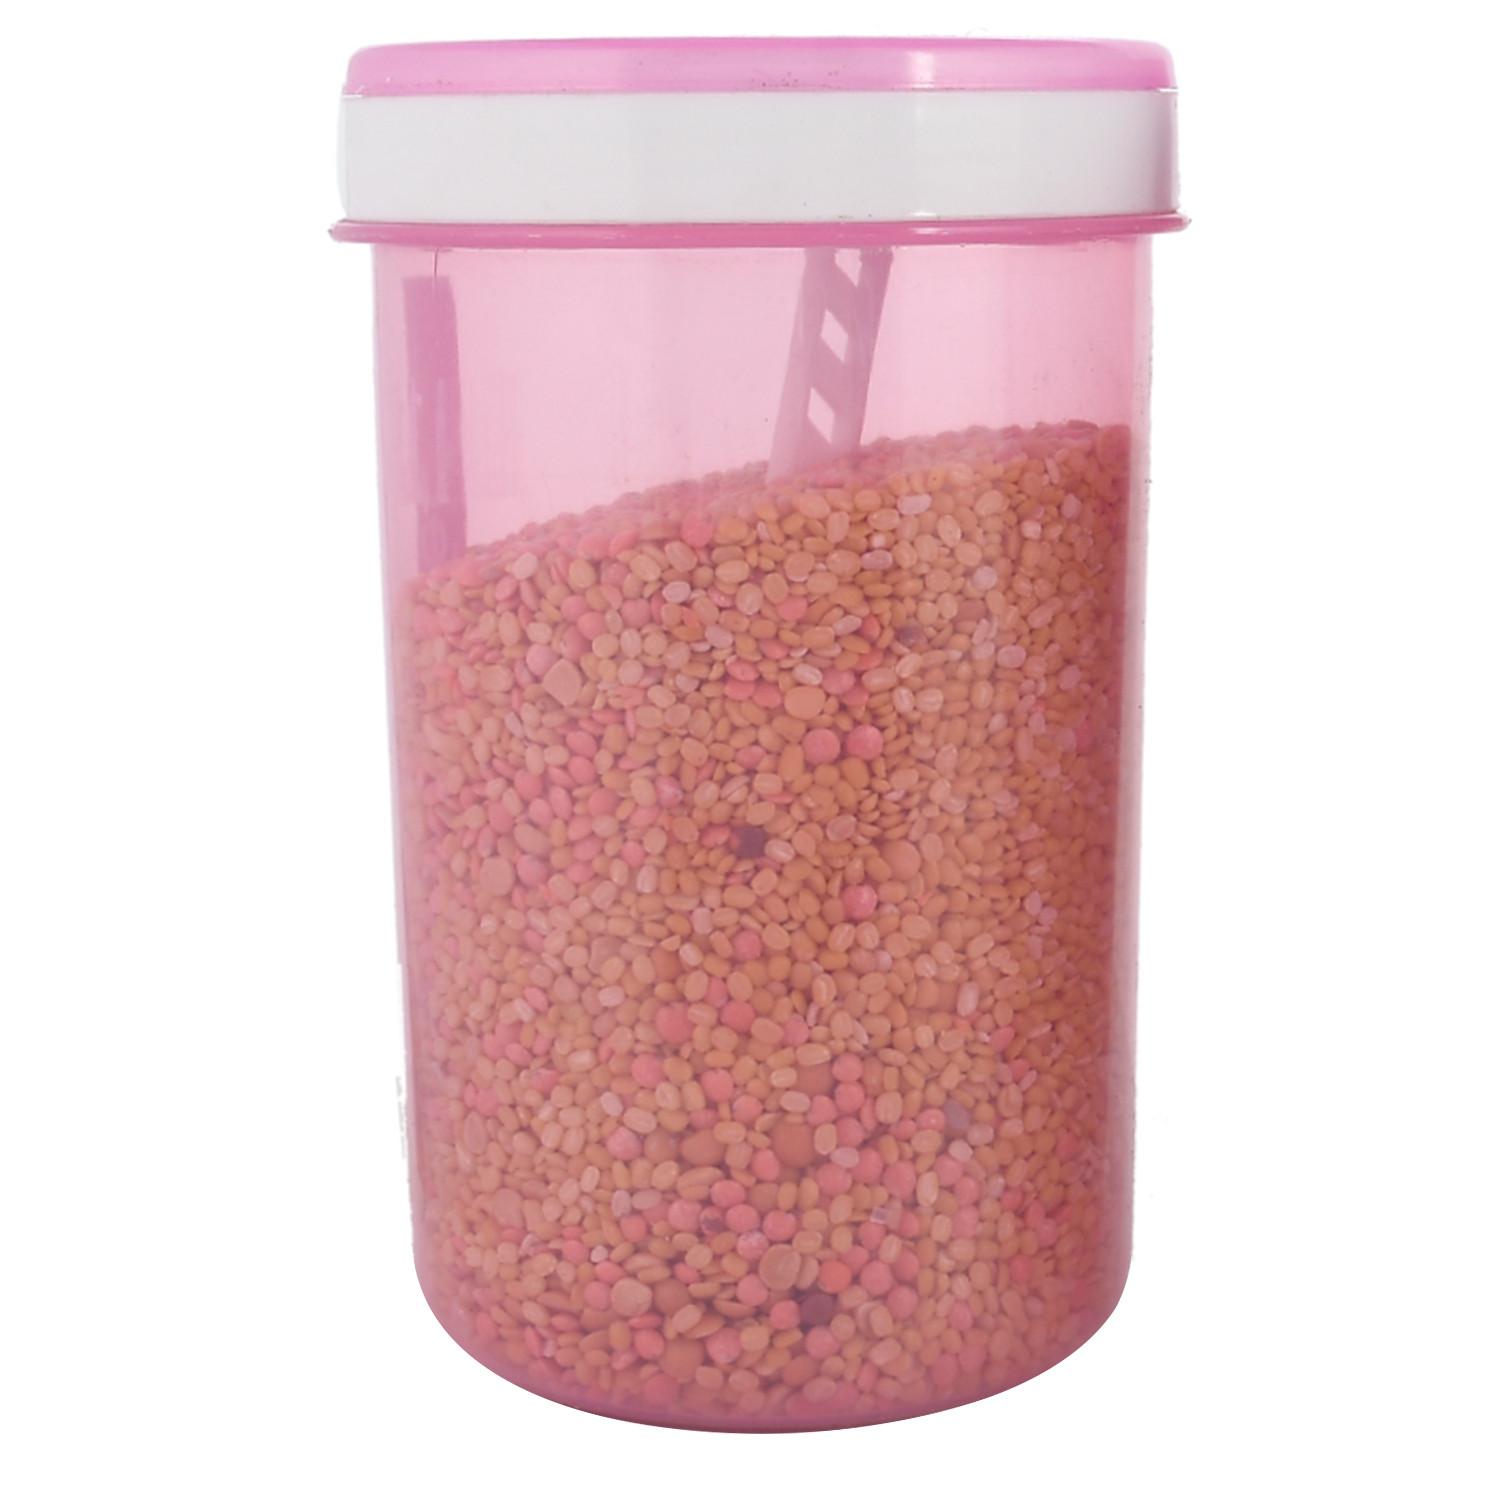 Kuber Industries Containers Set for Kitchen|BPA-Free Plastic Storage Containers Set|Kitchen Storage Containers|Grocery Containers with Spoon|SPICY 2000 ML| (Pink)